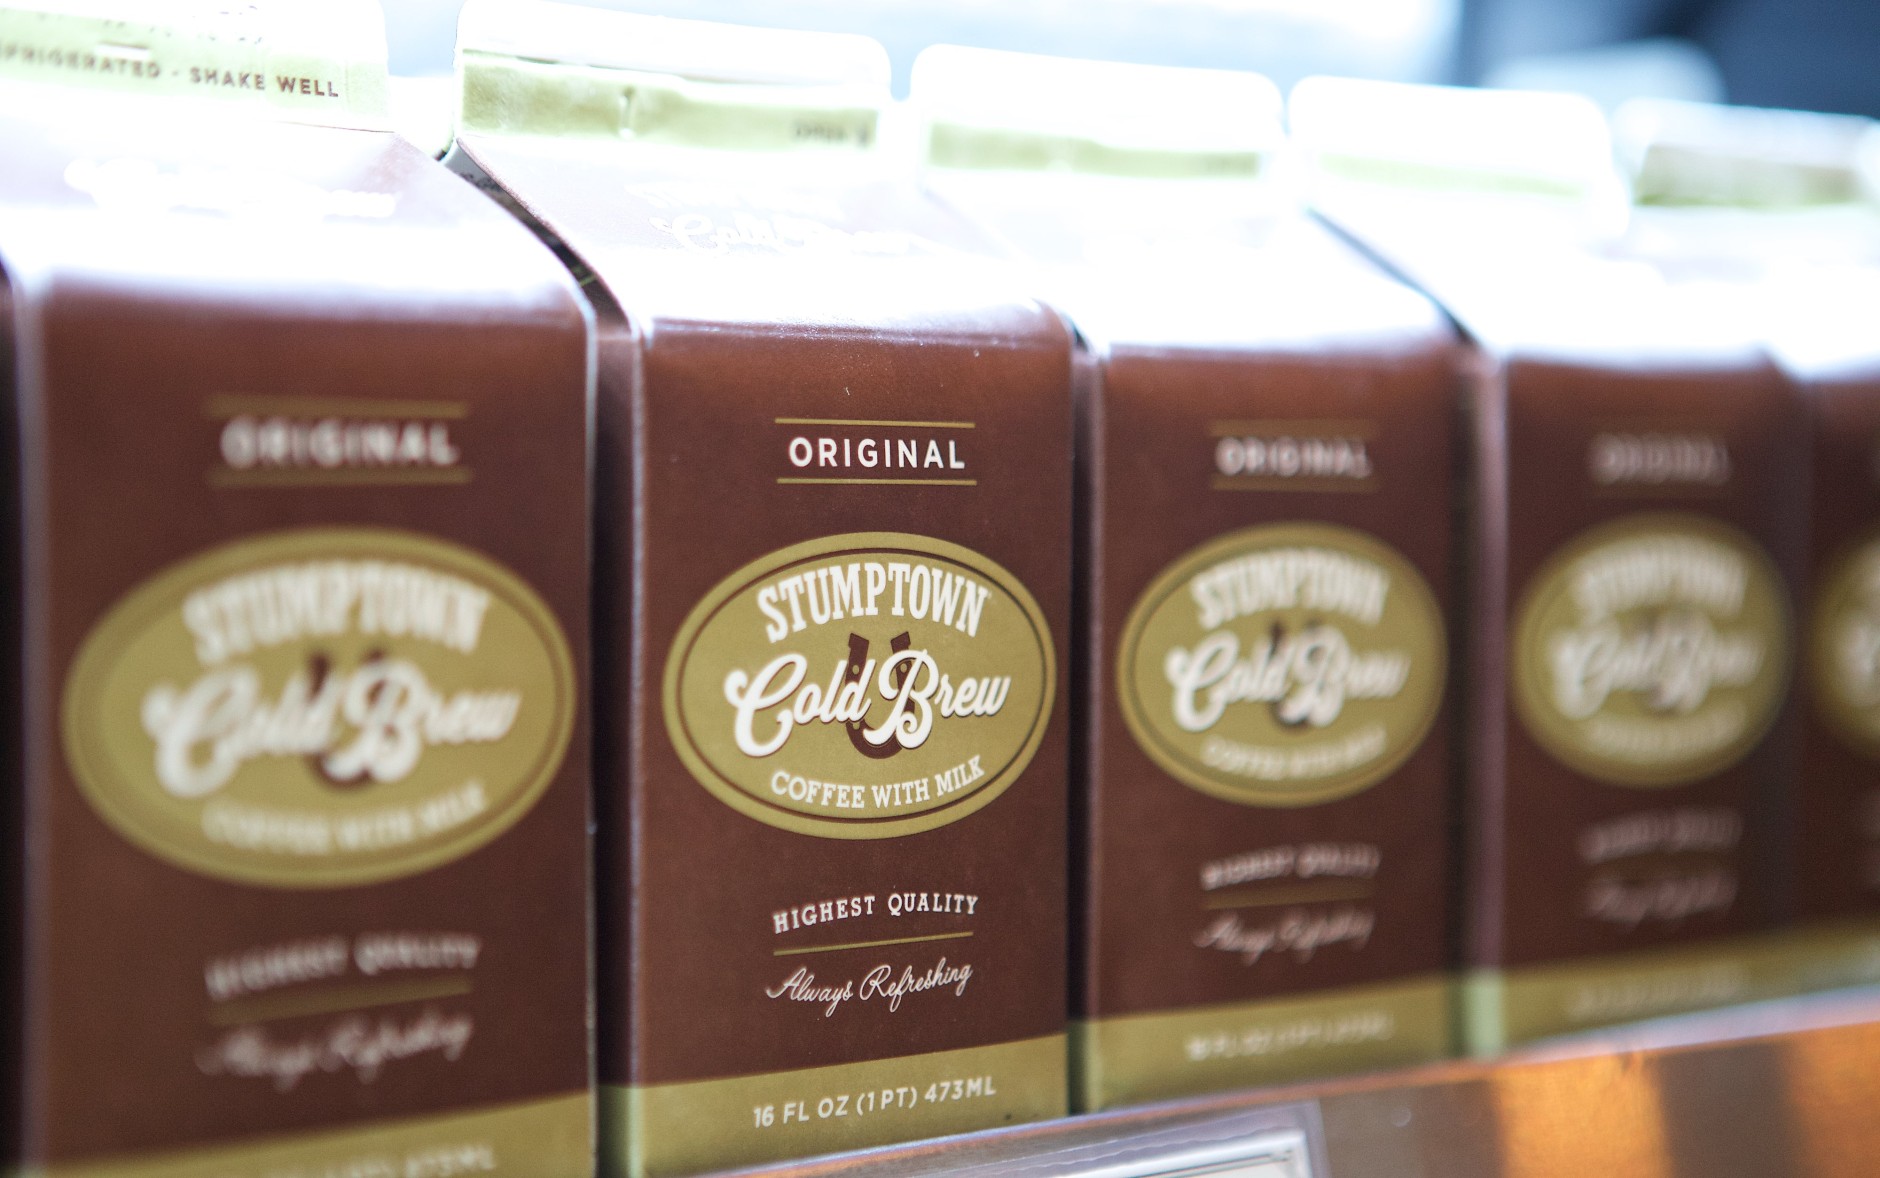 PORTLAND, OREGON - OCTOBER 6:  Stumptown Coffee Cold Brew is shown on display in the SE Division Street location on October 6, 2015 in Portland, Oregon. Stumptown's owner and founder Duane Sorenson has confirmed that the company will be acquired by Peet's Coffee &amp; Tea, according to published reports. Stumptown, which reportedly will operate independently after the aqcquisition, operates 10 stores in Portland, Seattle, New York and Los Angeles.  (Photo by Craig Mitchelldyer/Getty Images)